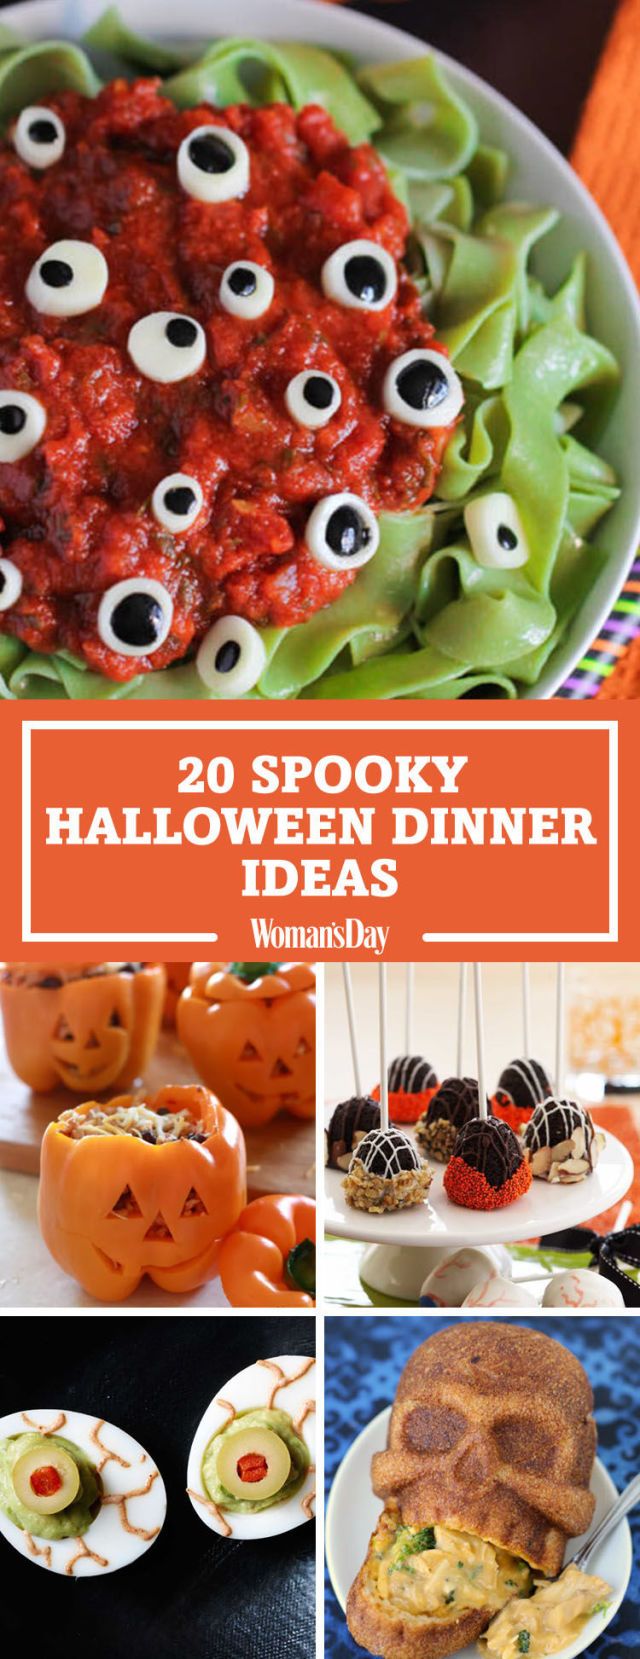 25+ Spooky Halloween Dinner Ideas - Best Recipes for Halloween Dishes